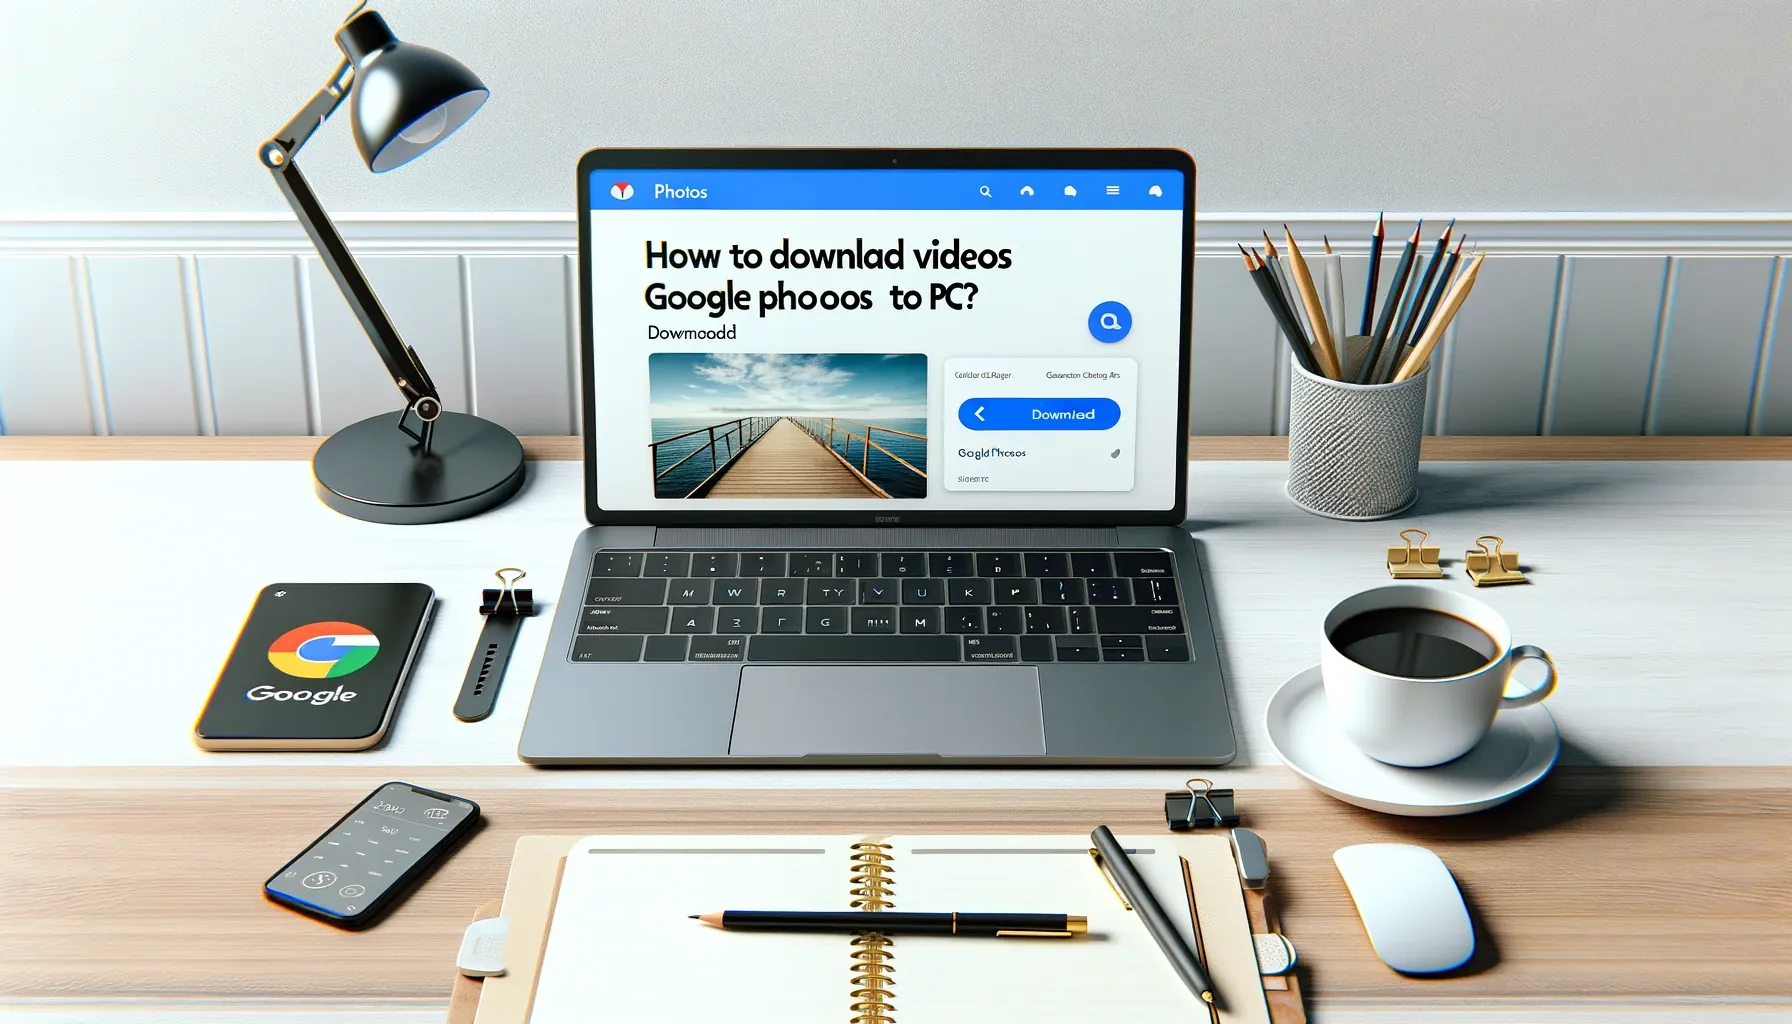 Download Videos from Google Photos to PC